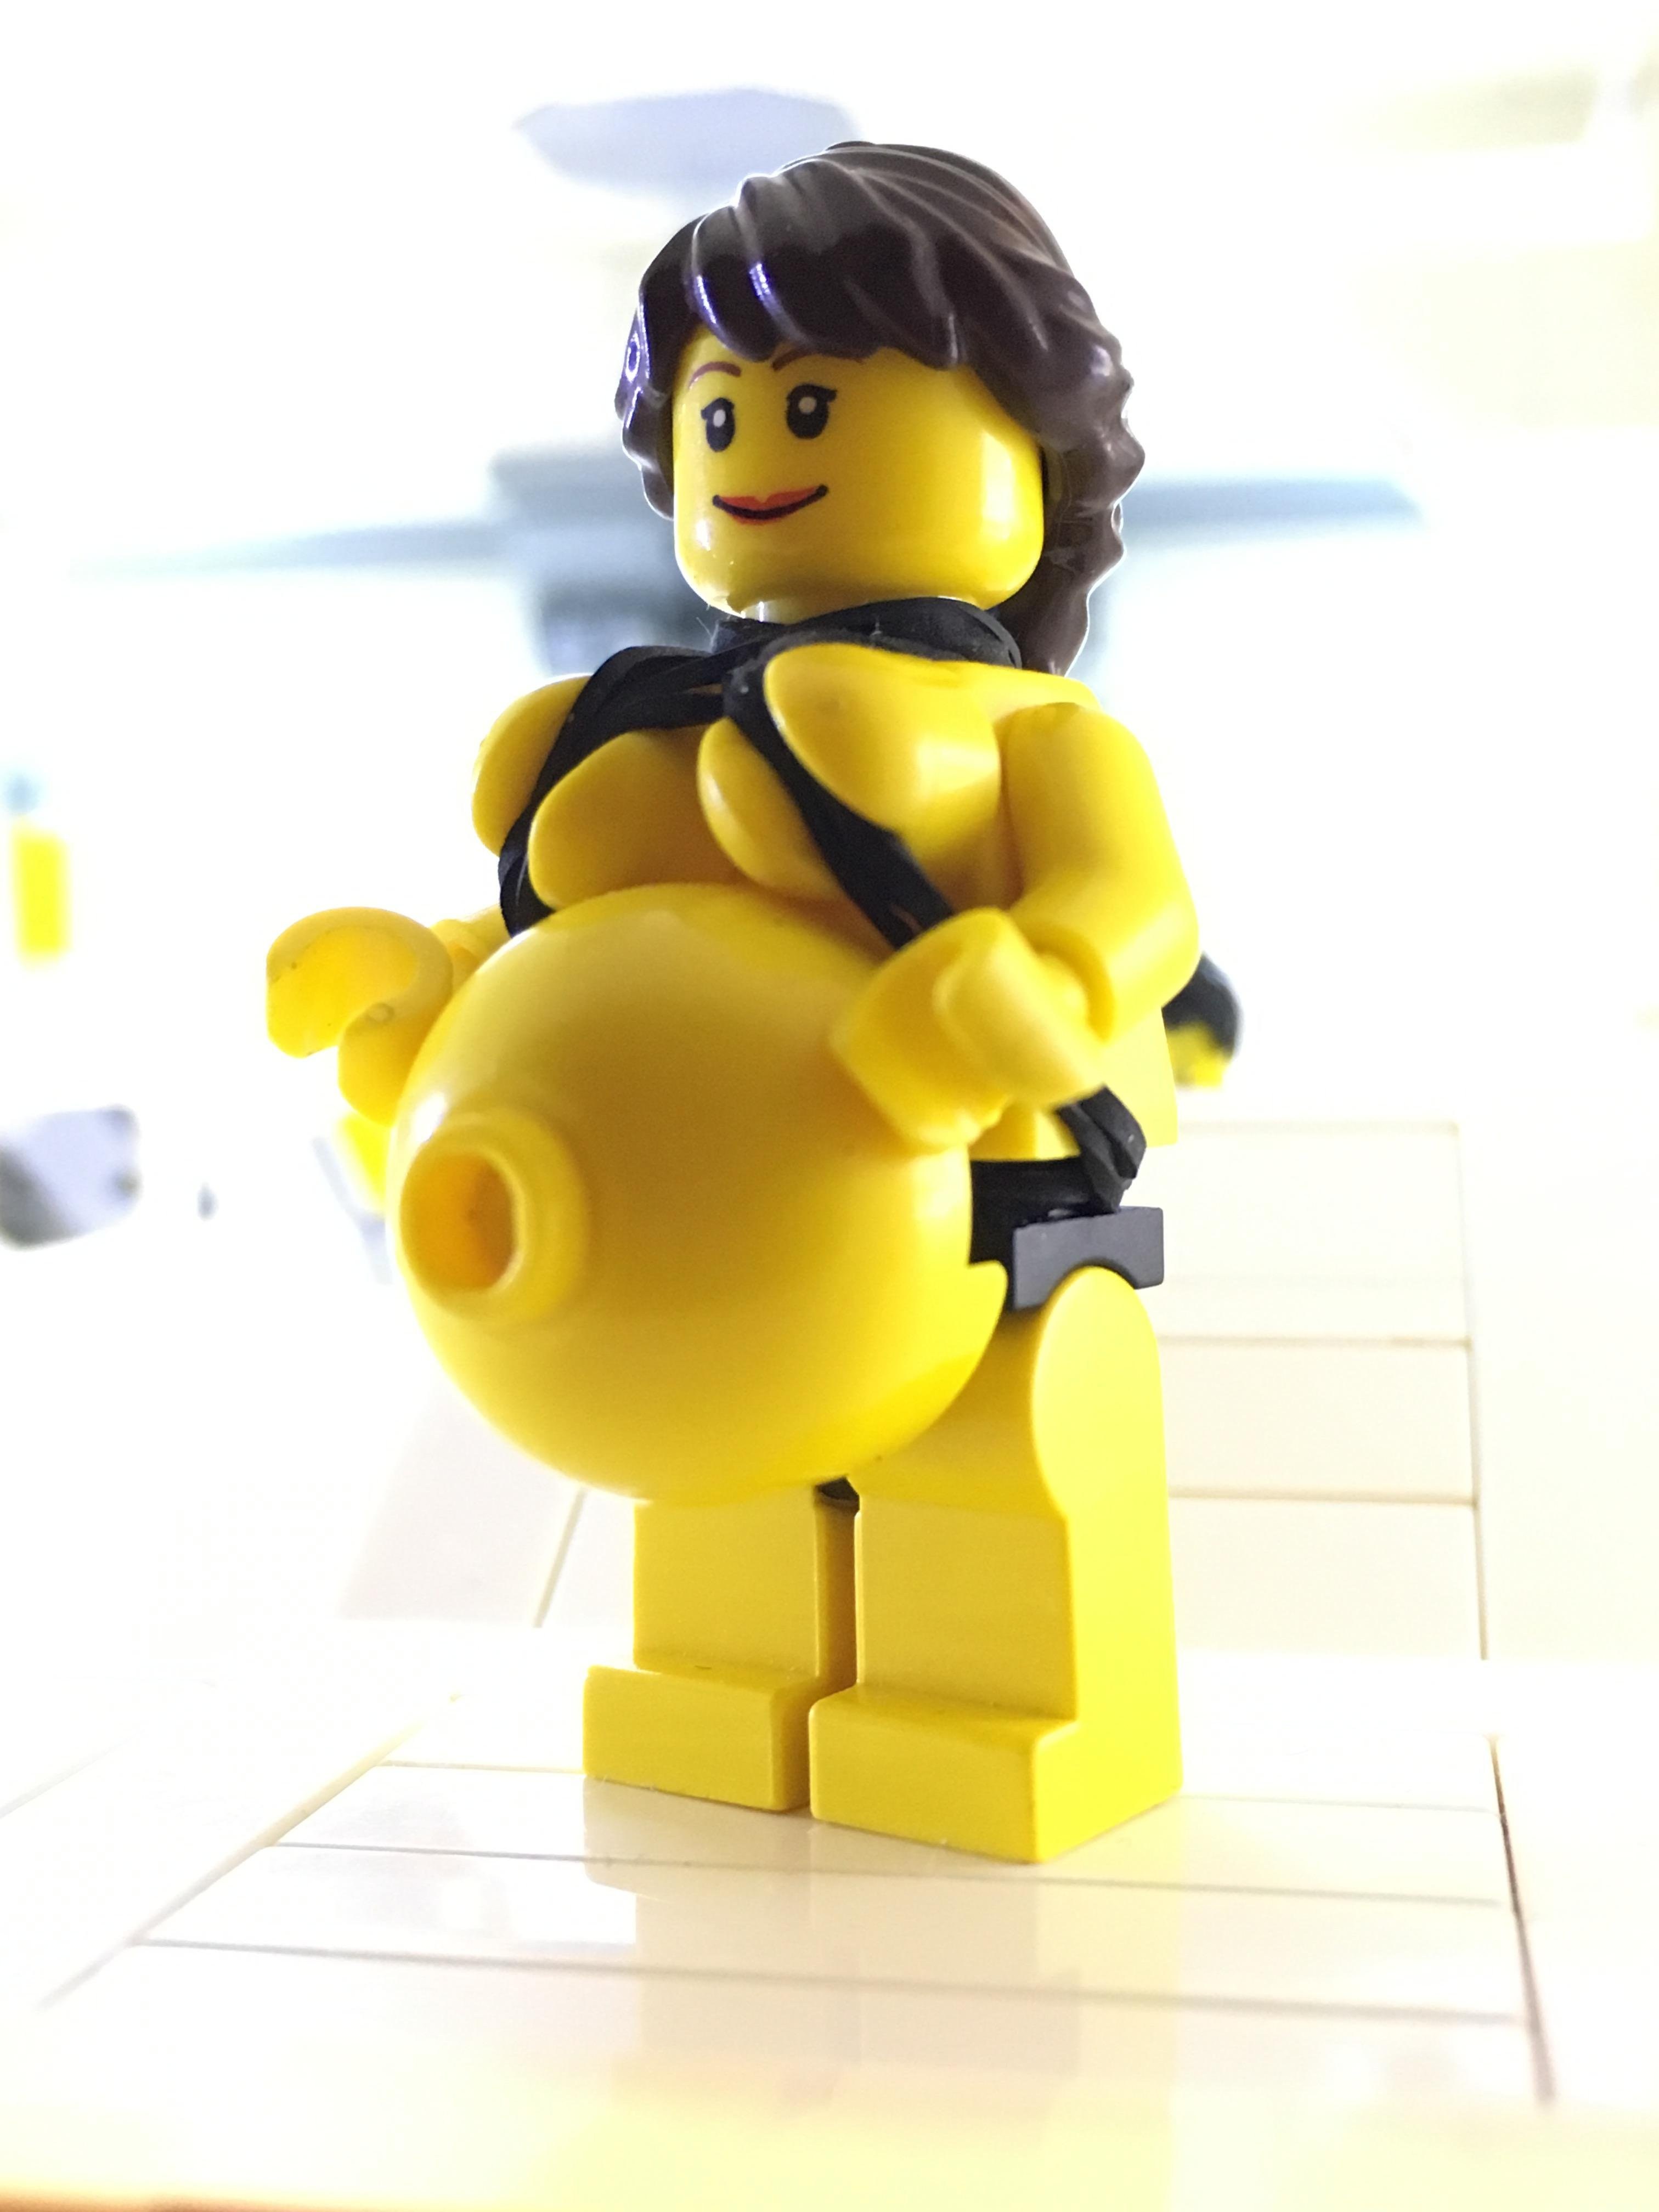 Lego Porn Tits - Lego tits - Best adult videos and photos